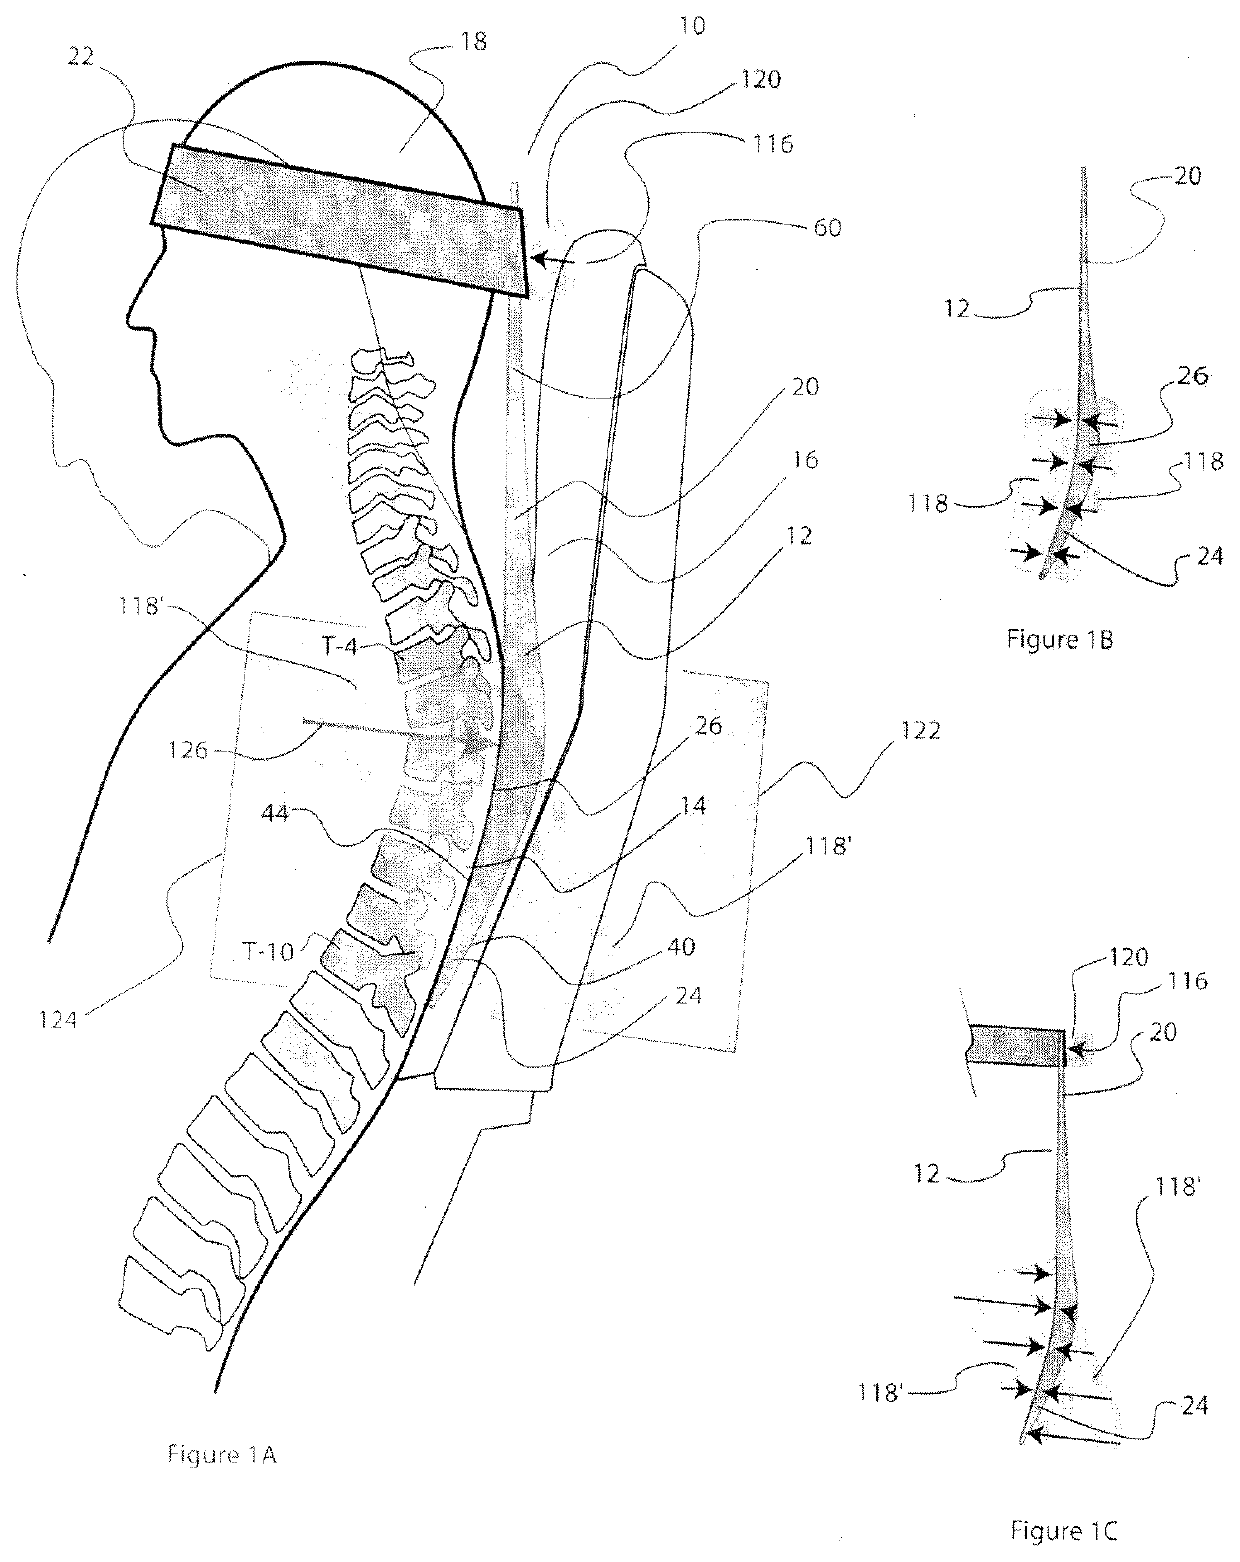 Anatomical head and neck restraining sleep aid and related products and methods